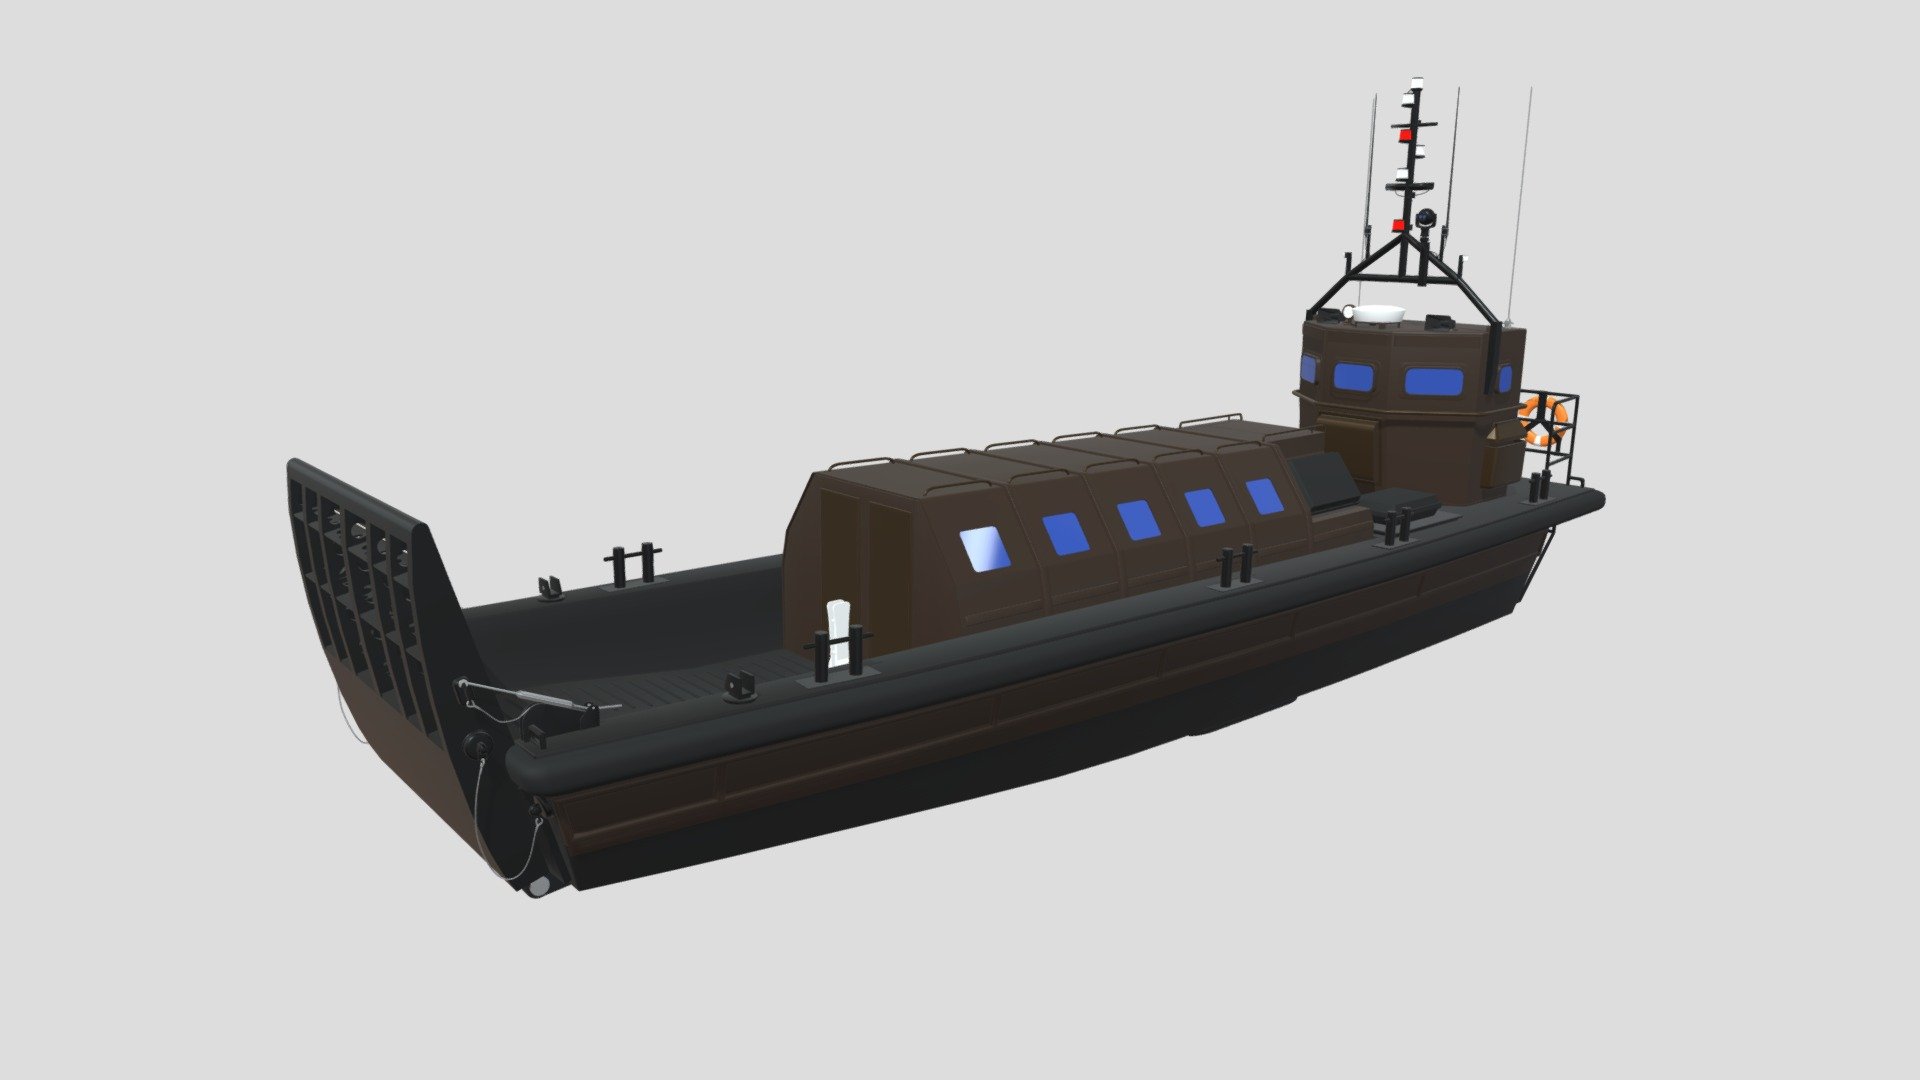 The Landing Craft Vehicle Personnel (LCVP) is a versatile amphibious landing craft designed to transport troops or armoured vehicles from ship to shore during amphibious landings.
This was the model that came along with the purchase by the Brazilian Navy of HMS Ocean, now called NAM Atlântico.
The model was made in Blender 3.2.1 - LCVP- Mk5 - Landing Craft Vehicle Personnel - 3D model by DFL81 3d model